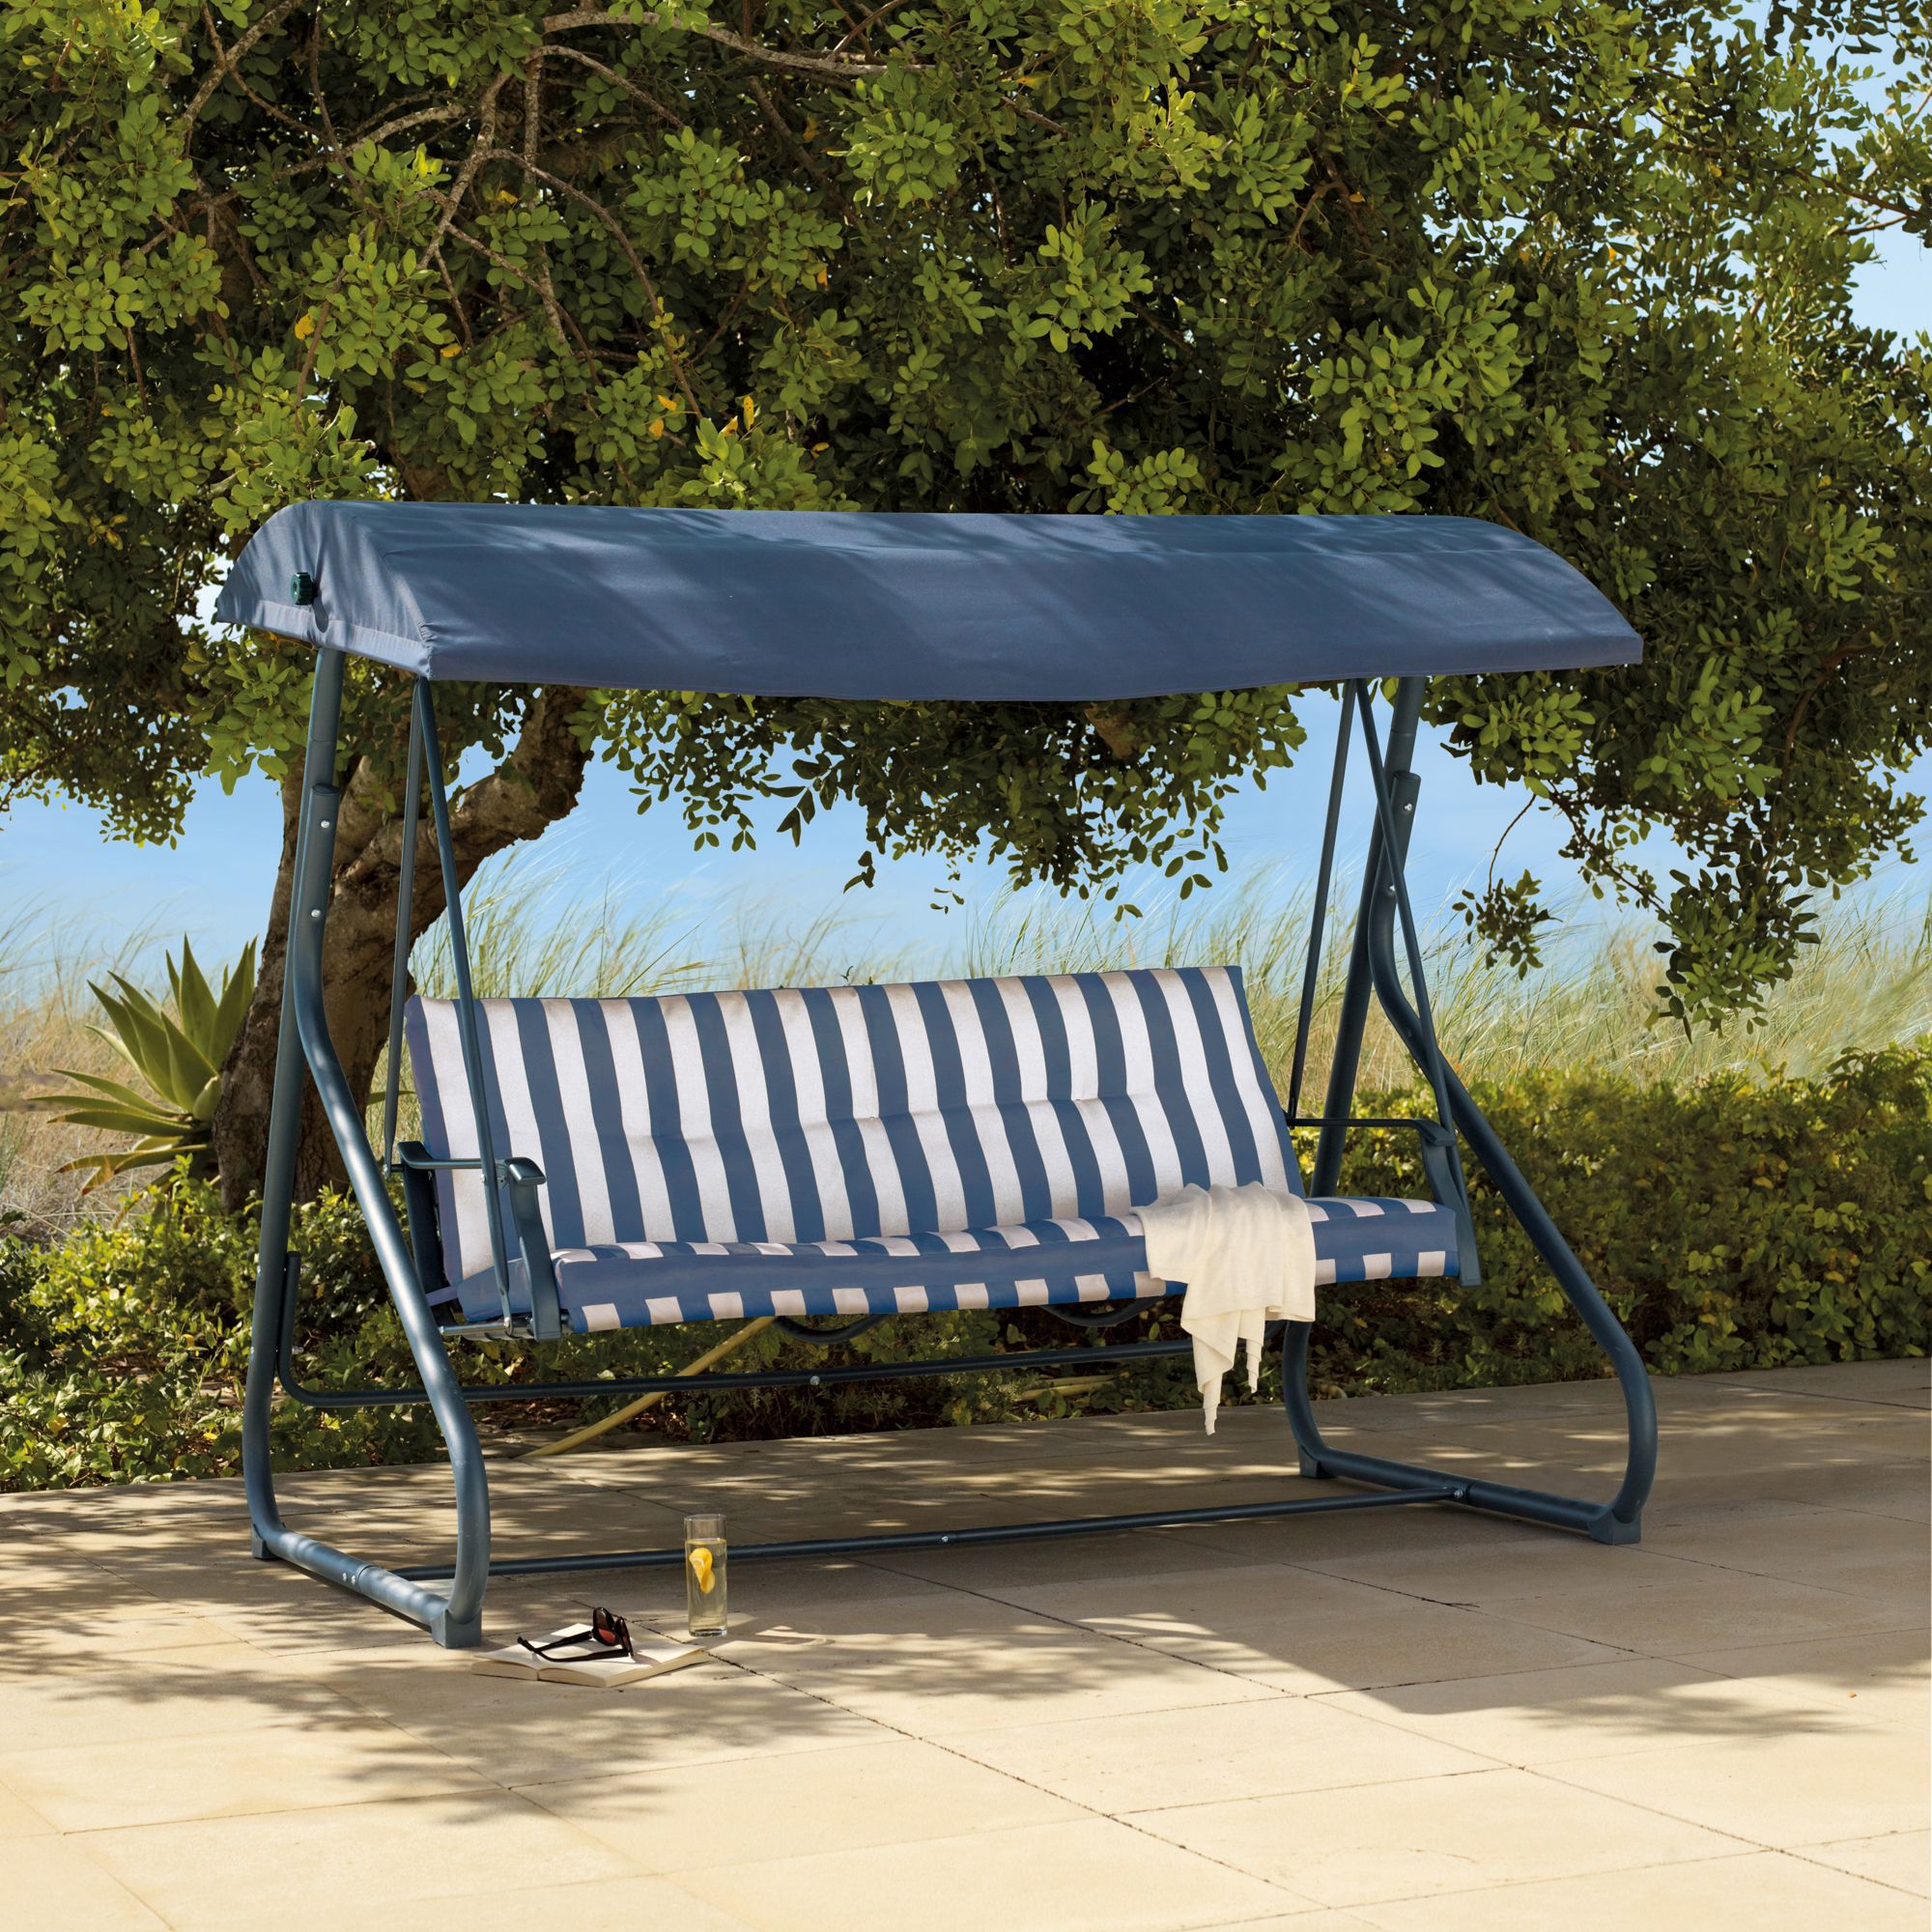 B&Q Garden Swing Seat Cover : Octopus Leisure Replacement B Q Sorrento